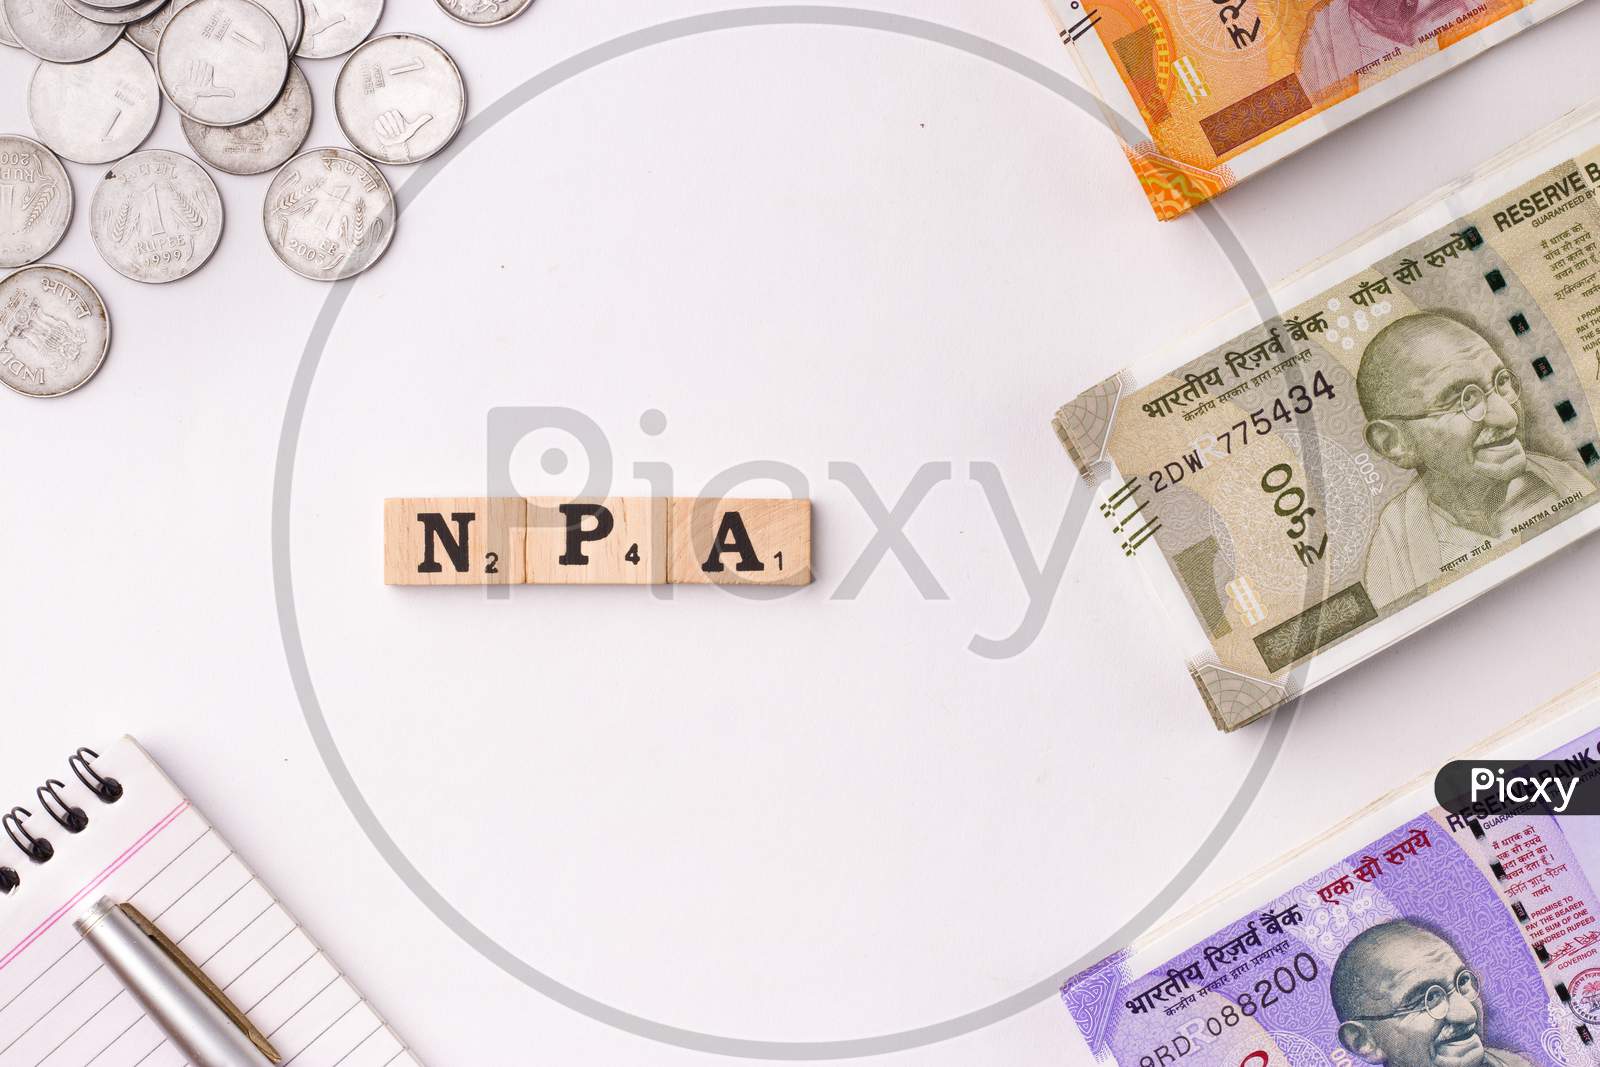 Assam, india - March 30, 2021 : Word PROFIT written on wooden cubes stock image.